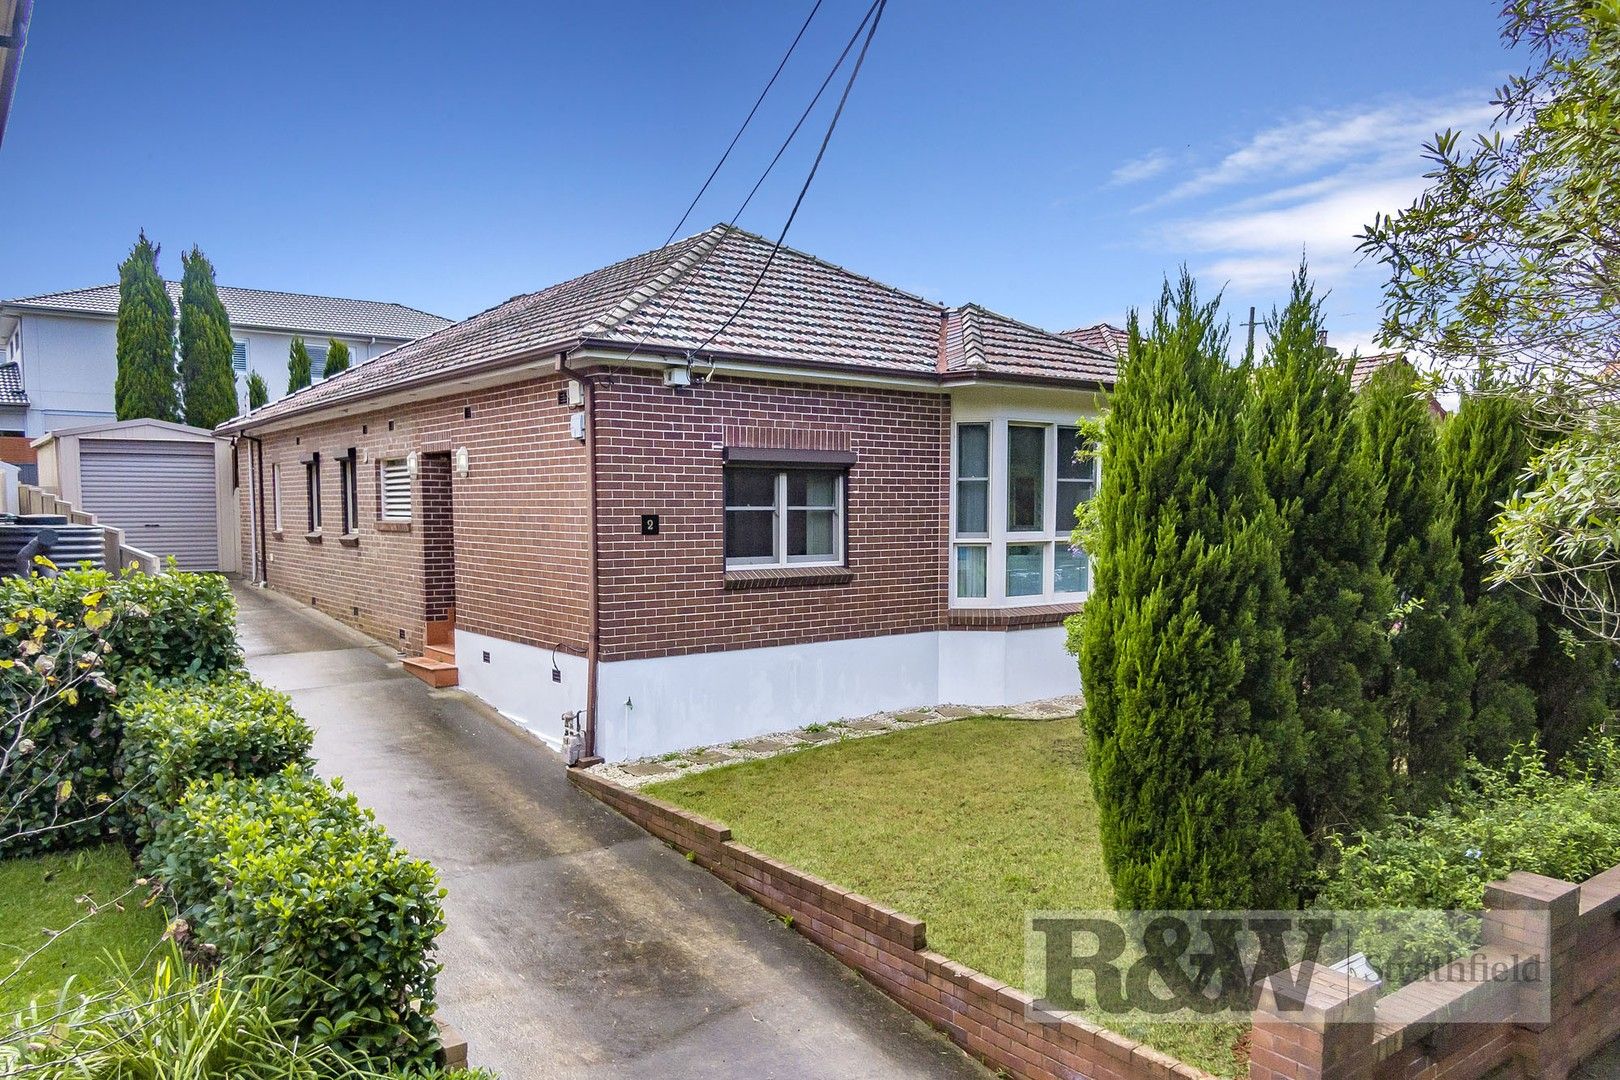 2 BREWER STREET, Concord NSW 2137, Image 0